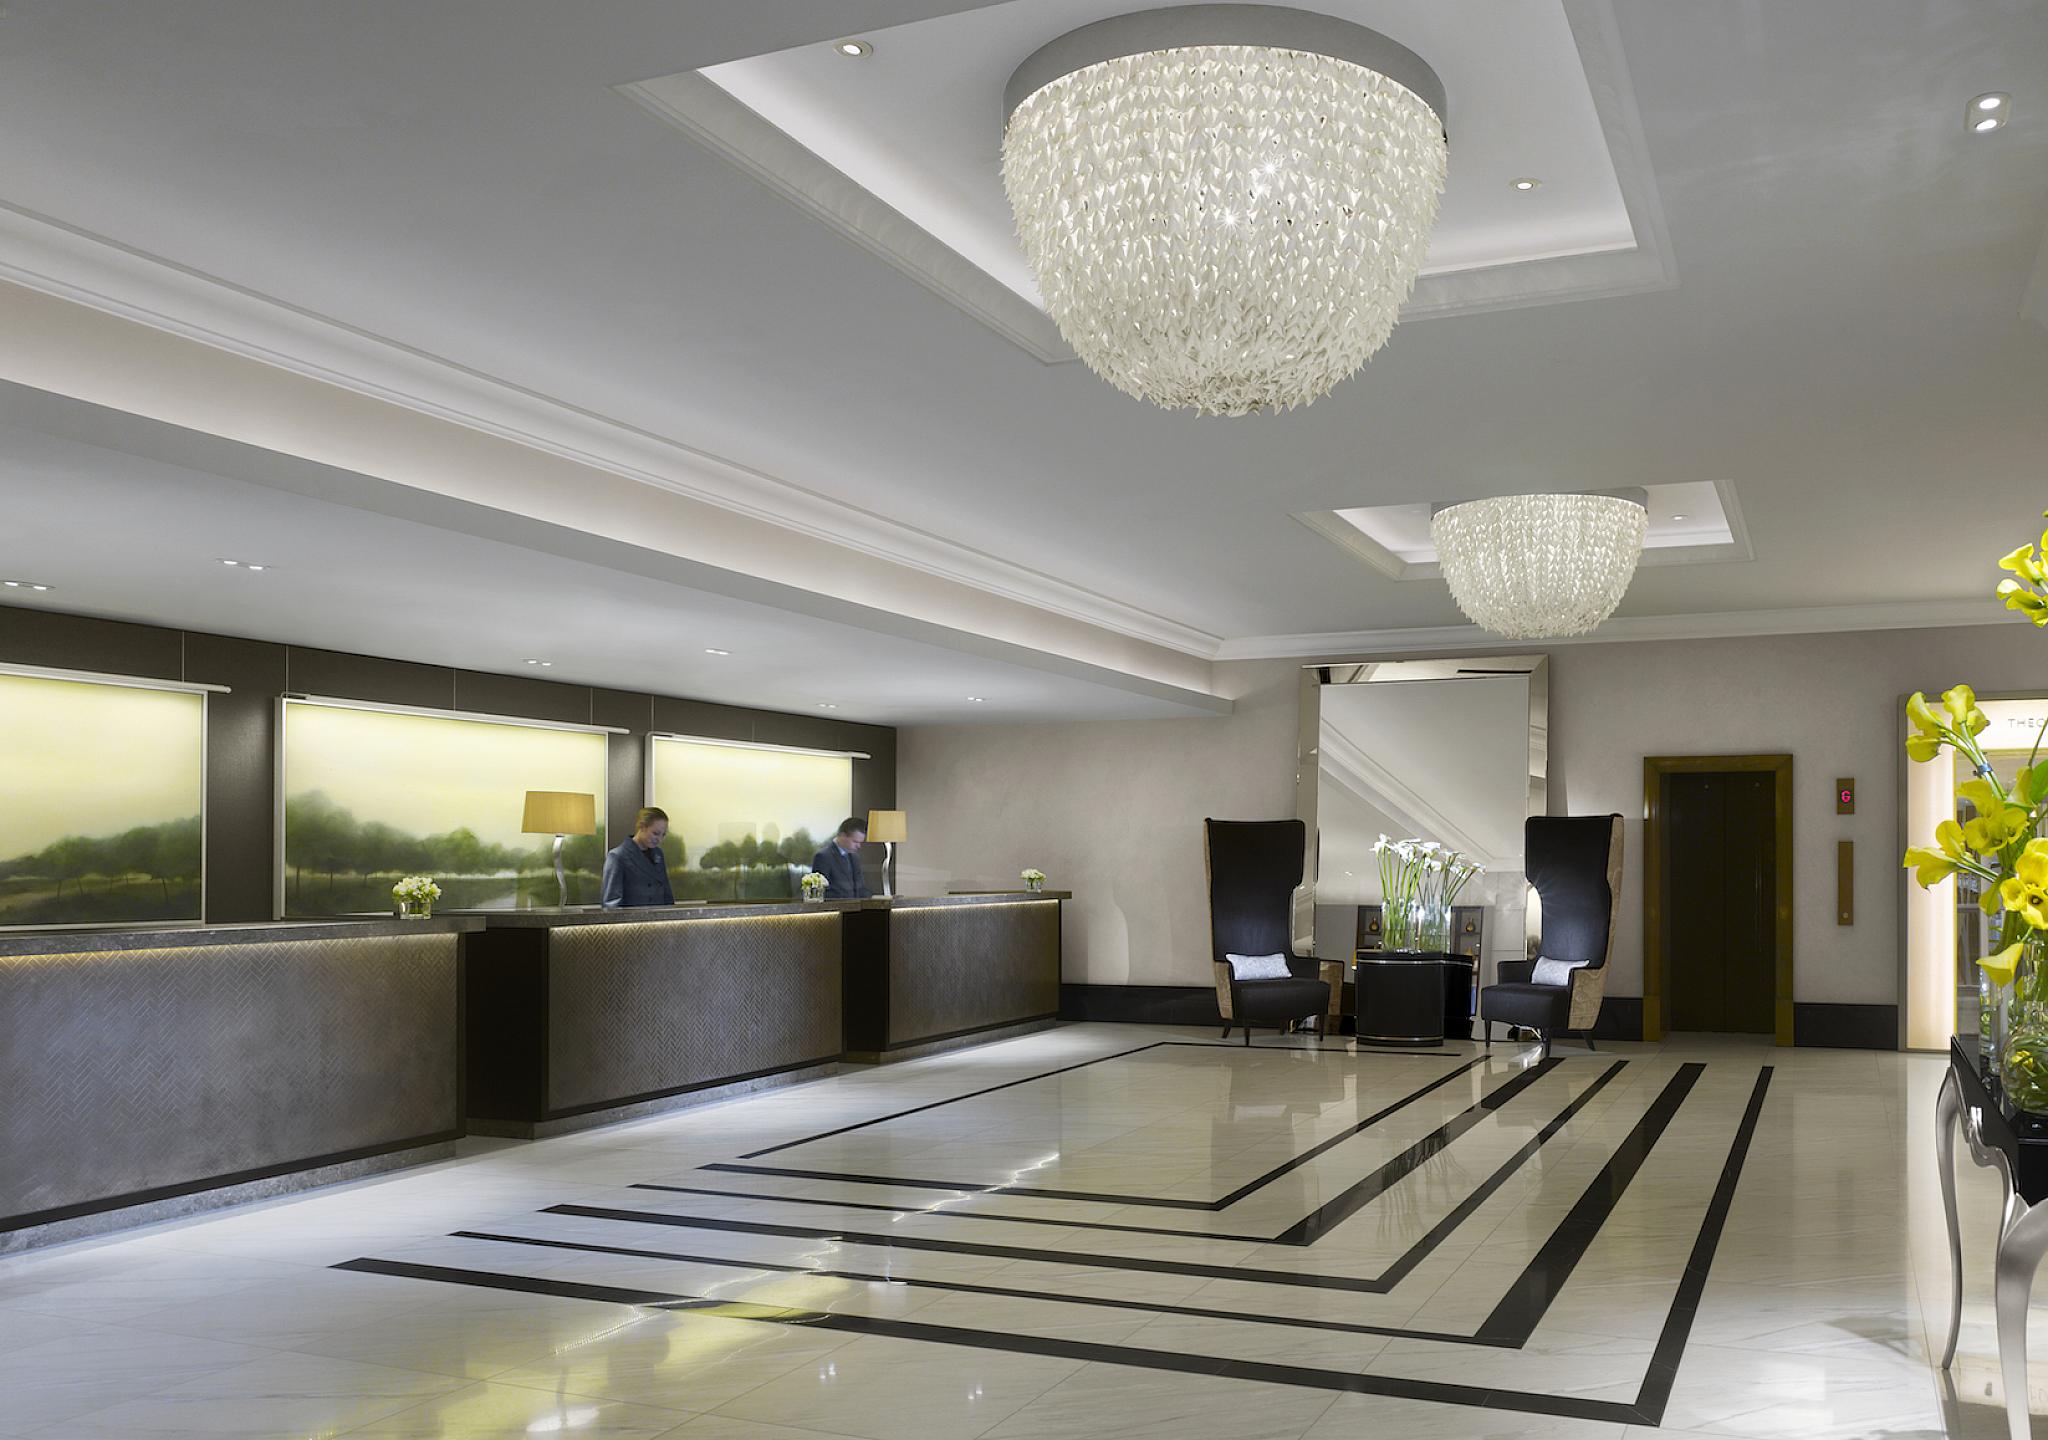 InterContinental Park Lane London - The International Tourism & Investment Conference ...2048 x 1440